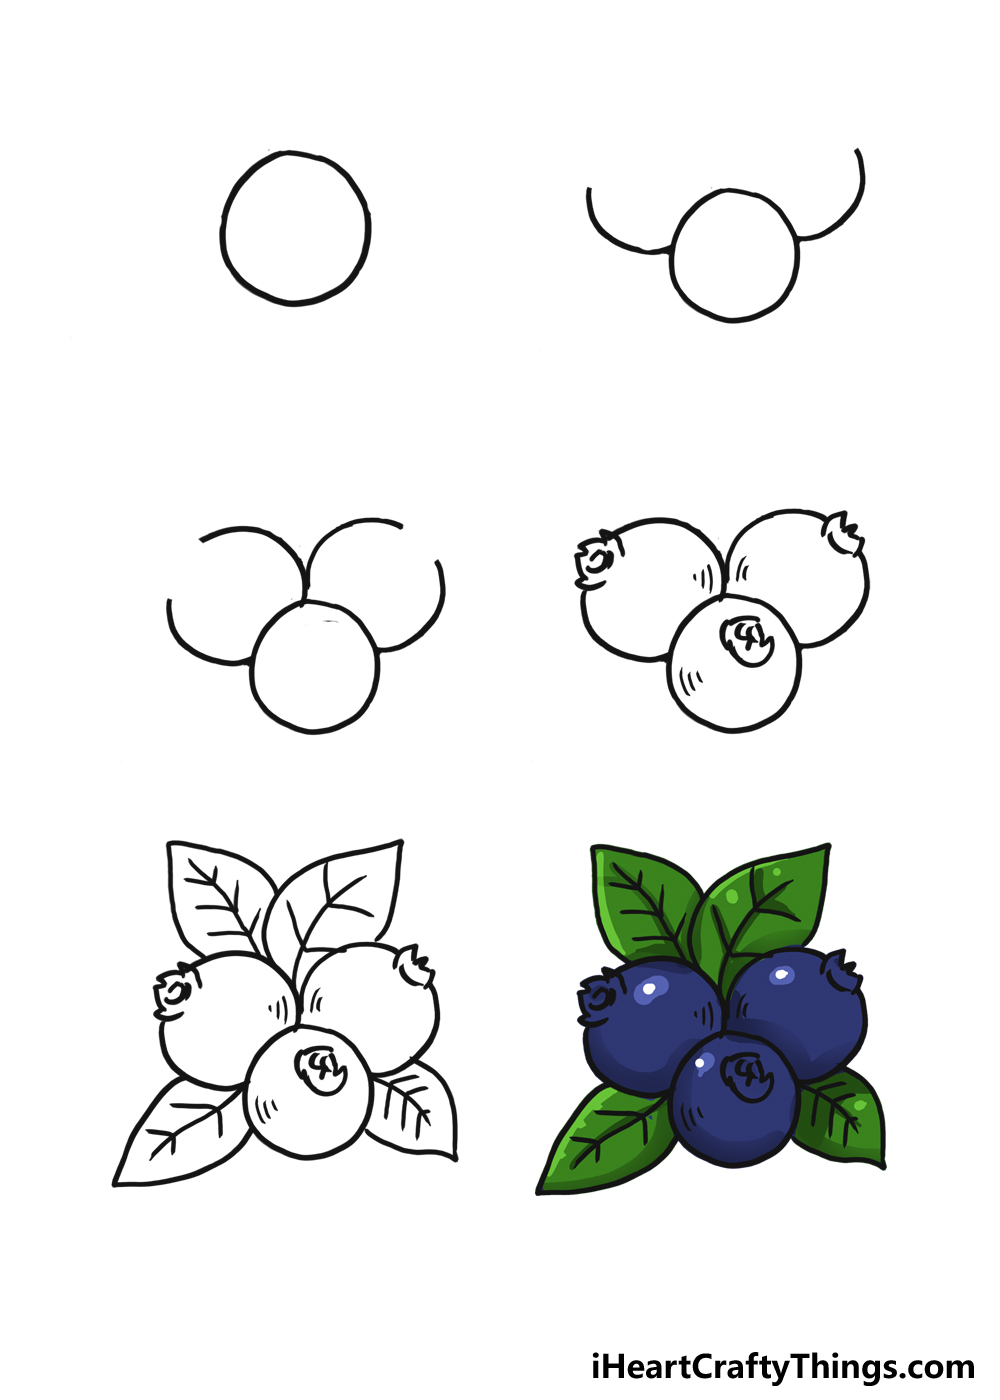 How to Draw A Blueberry